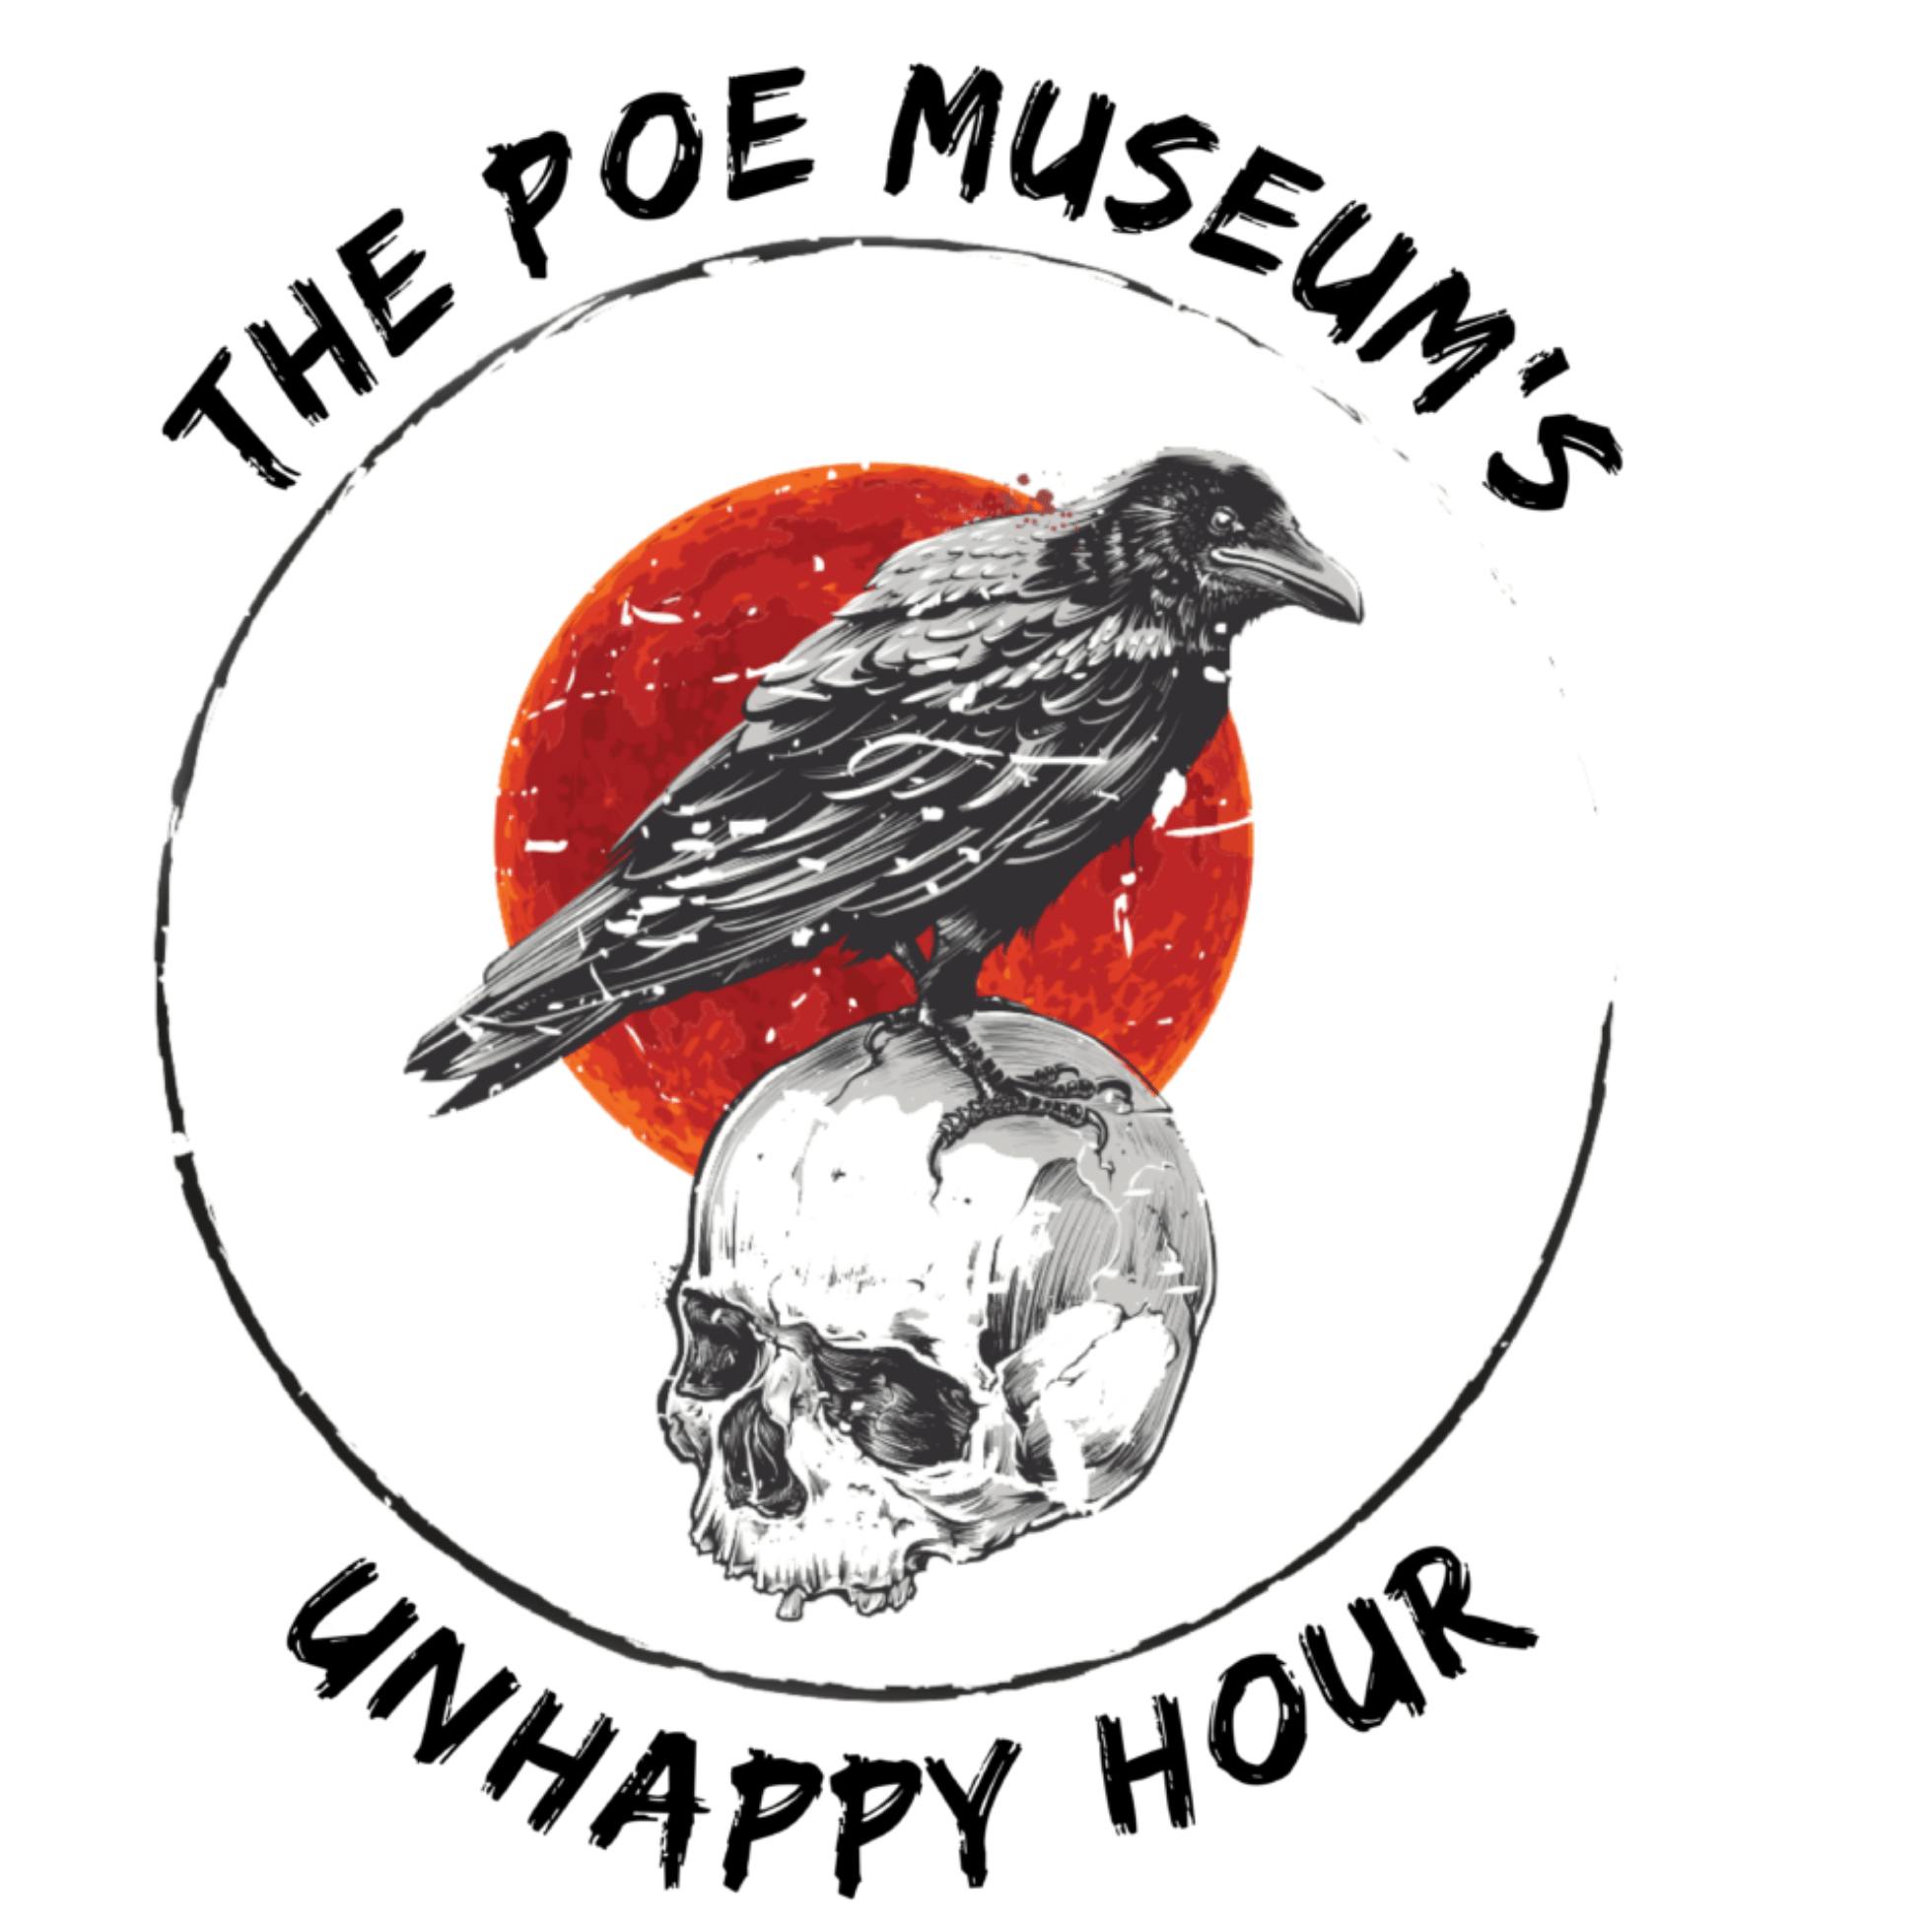 April UnHappy Hour: Poe Museum's 100th Anniversary